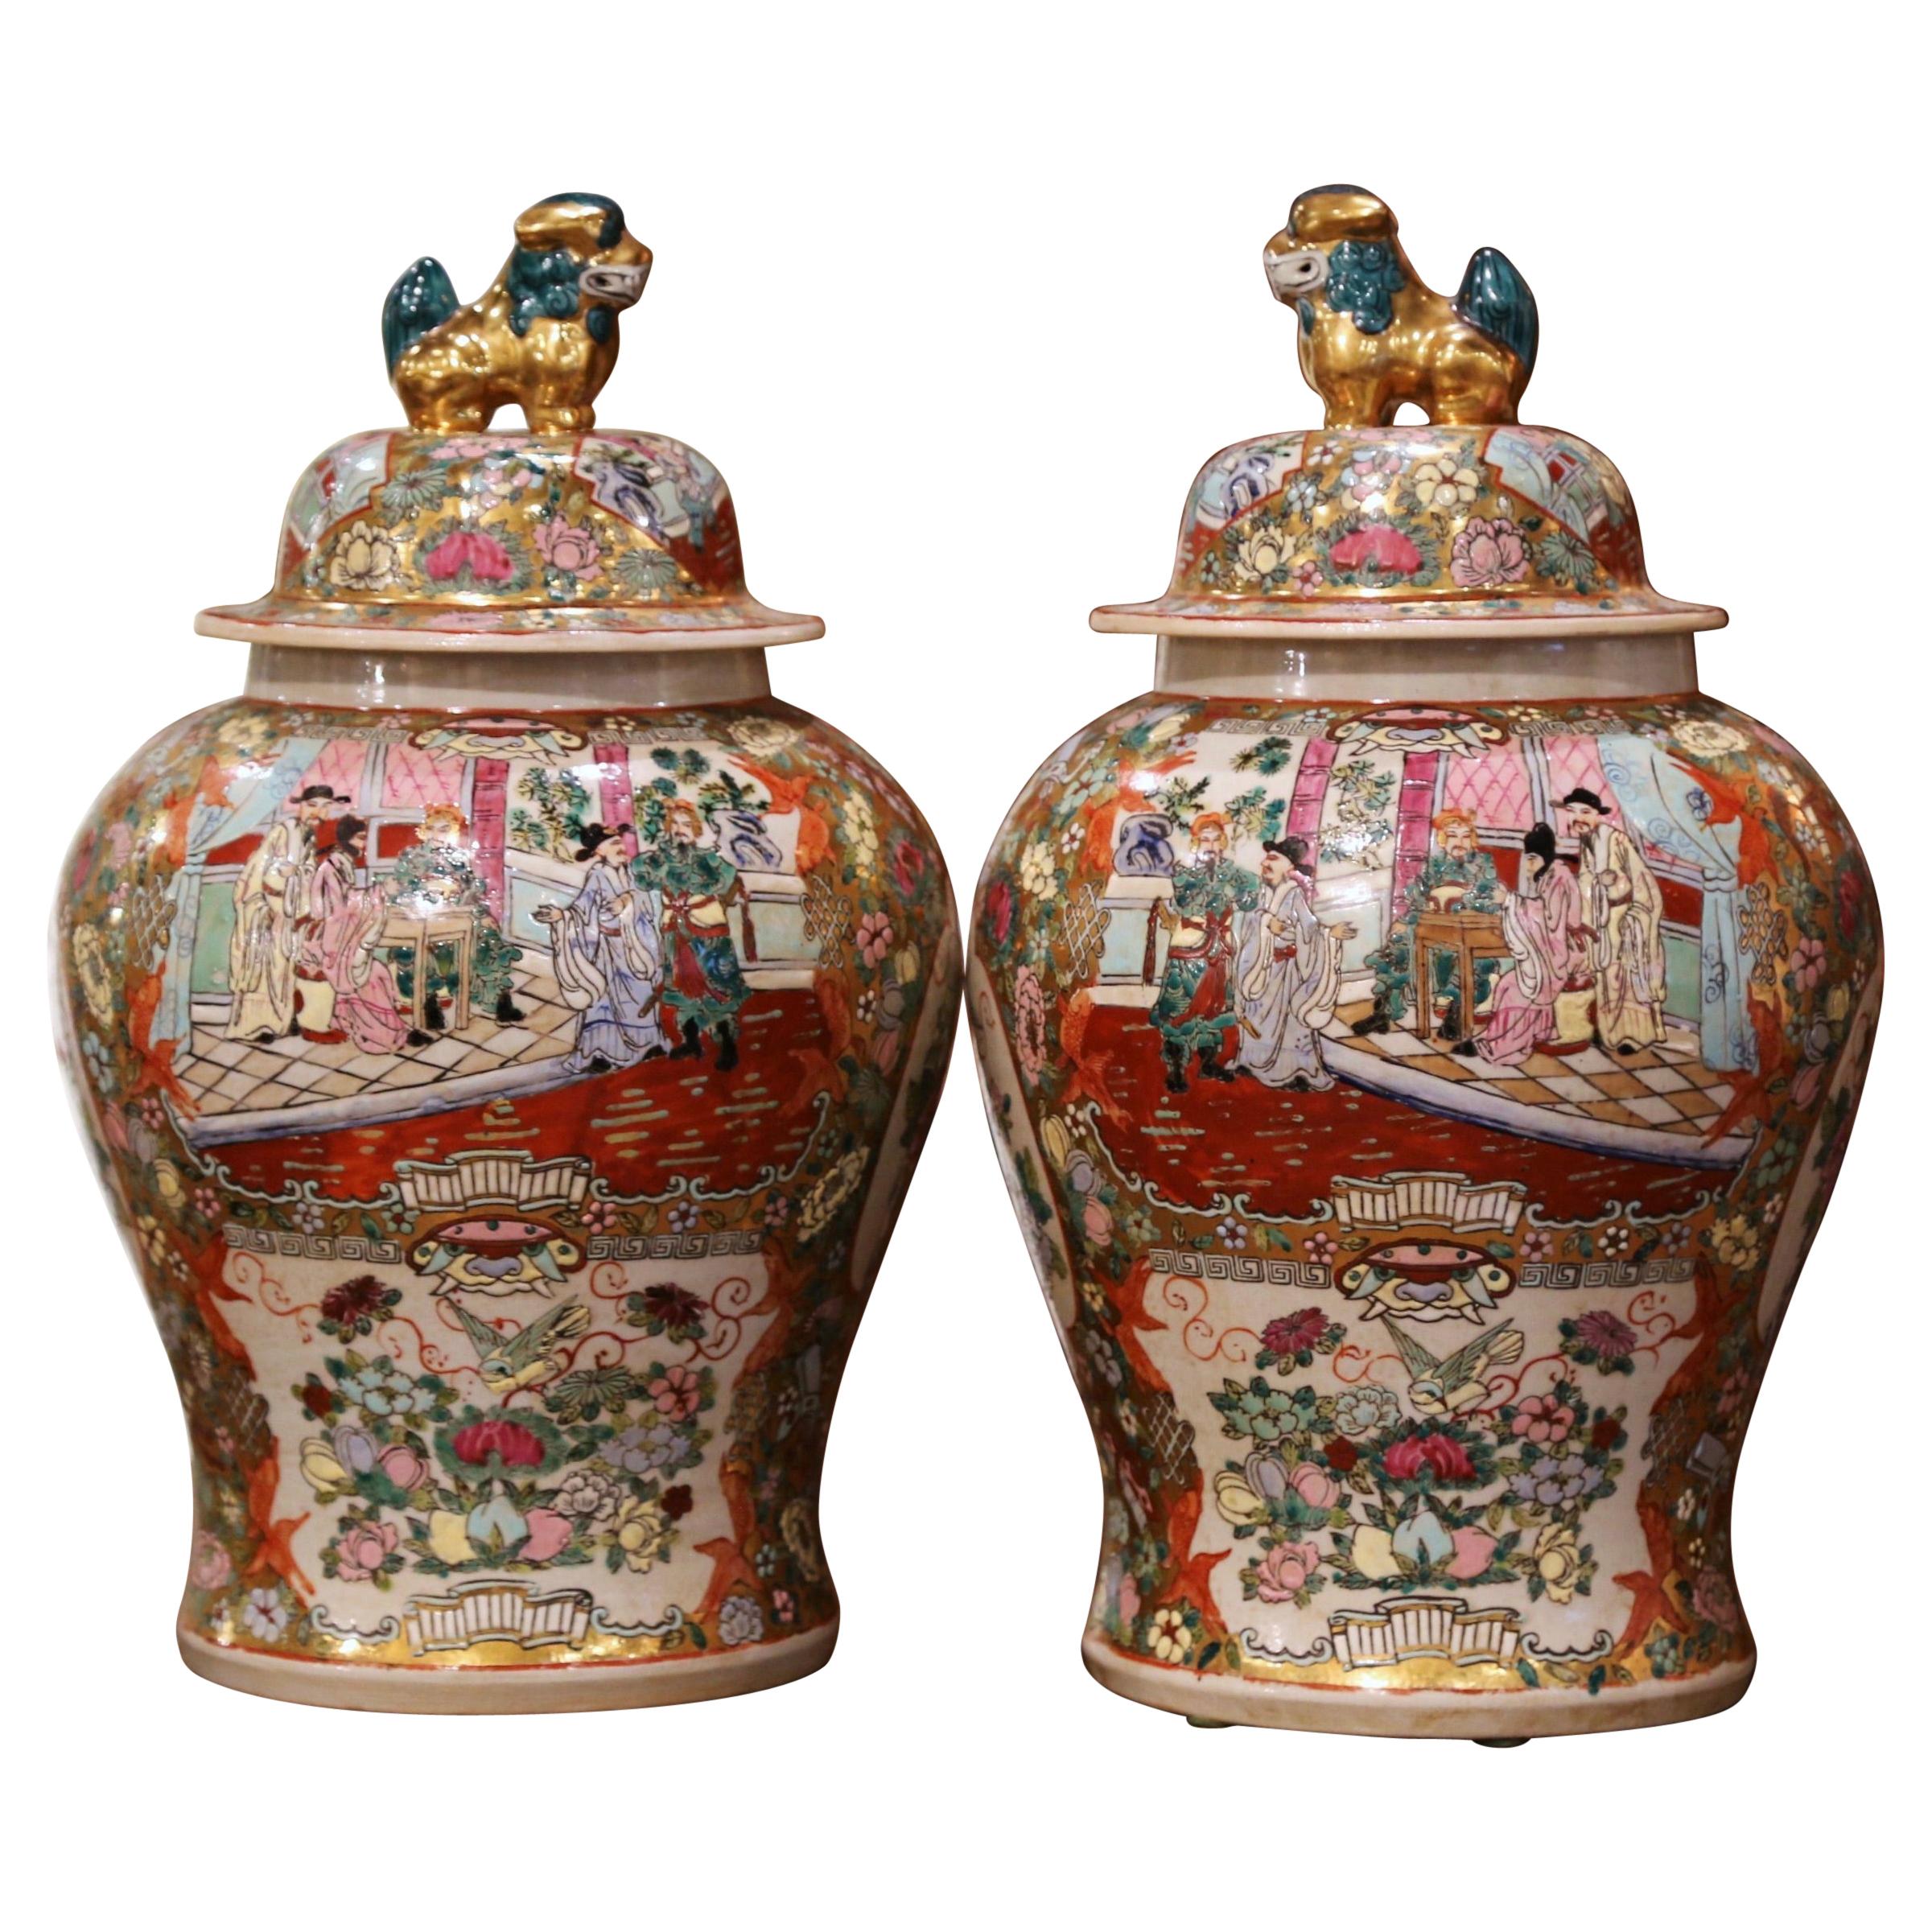 Pair of Chinese Painted and Gilt Famille Rose Porcelain Ginger Jars with Lids